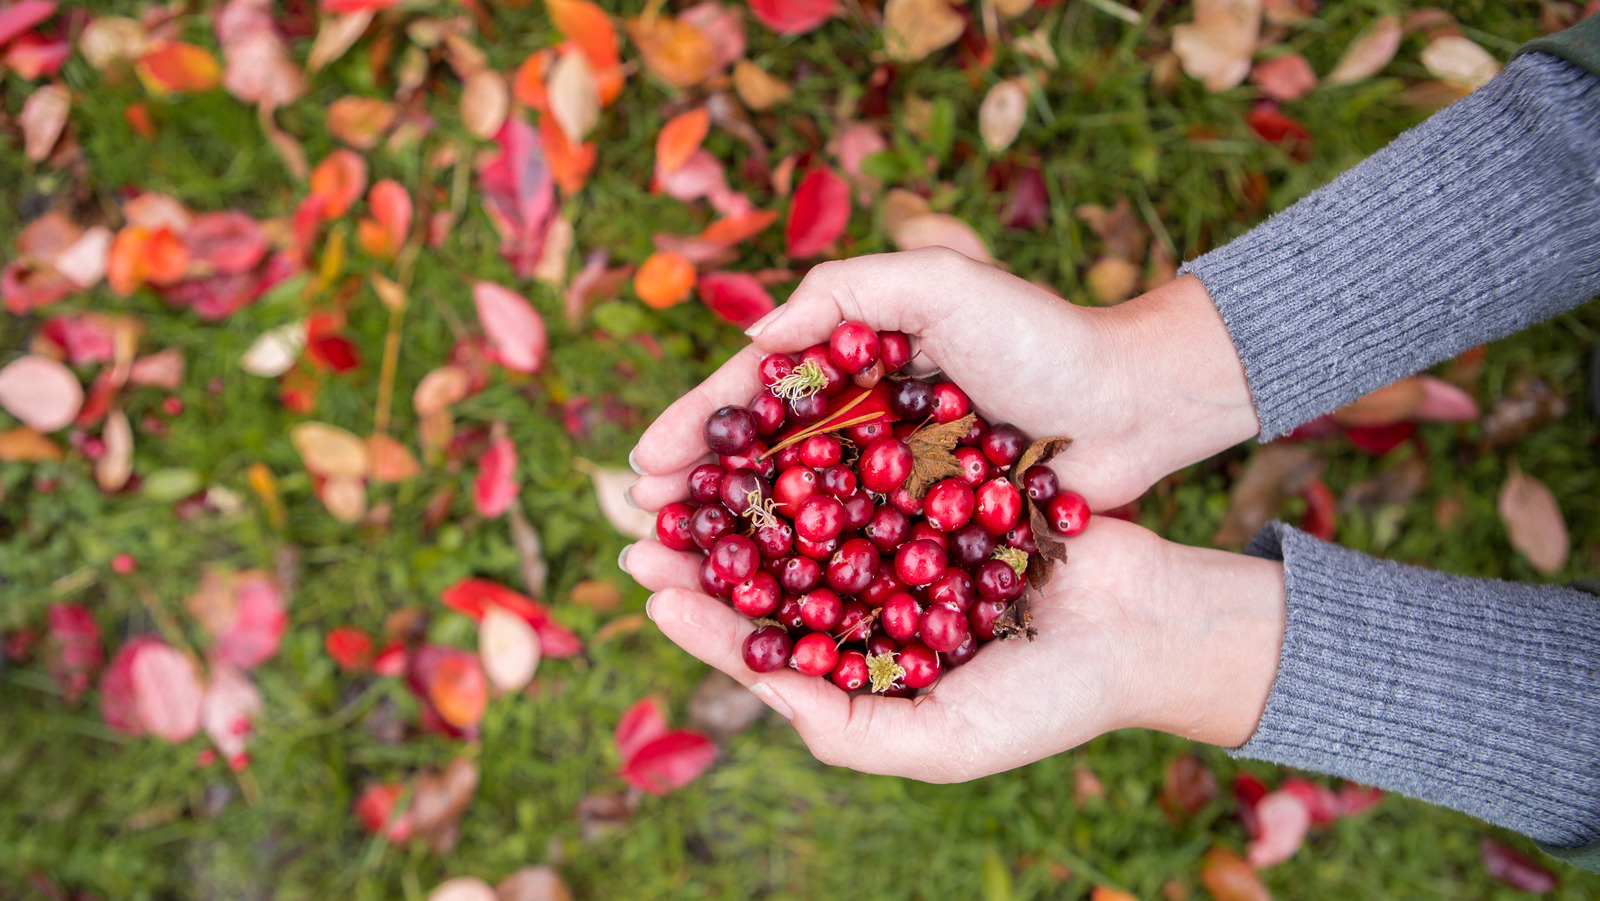 Will There Be A Cranberry Shortage For Thanksgiving 2022?